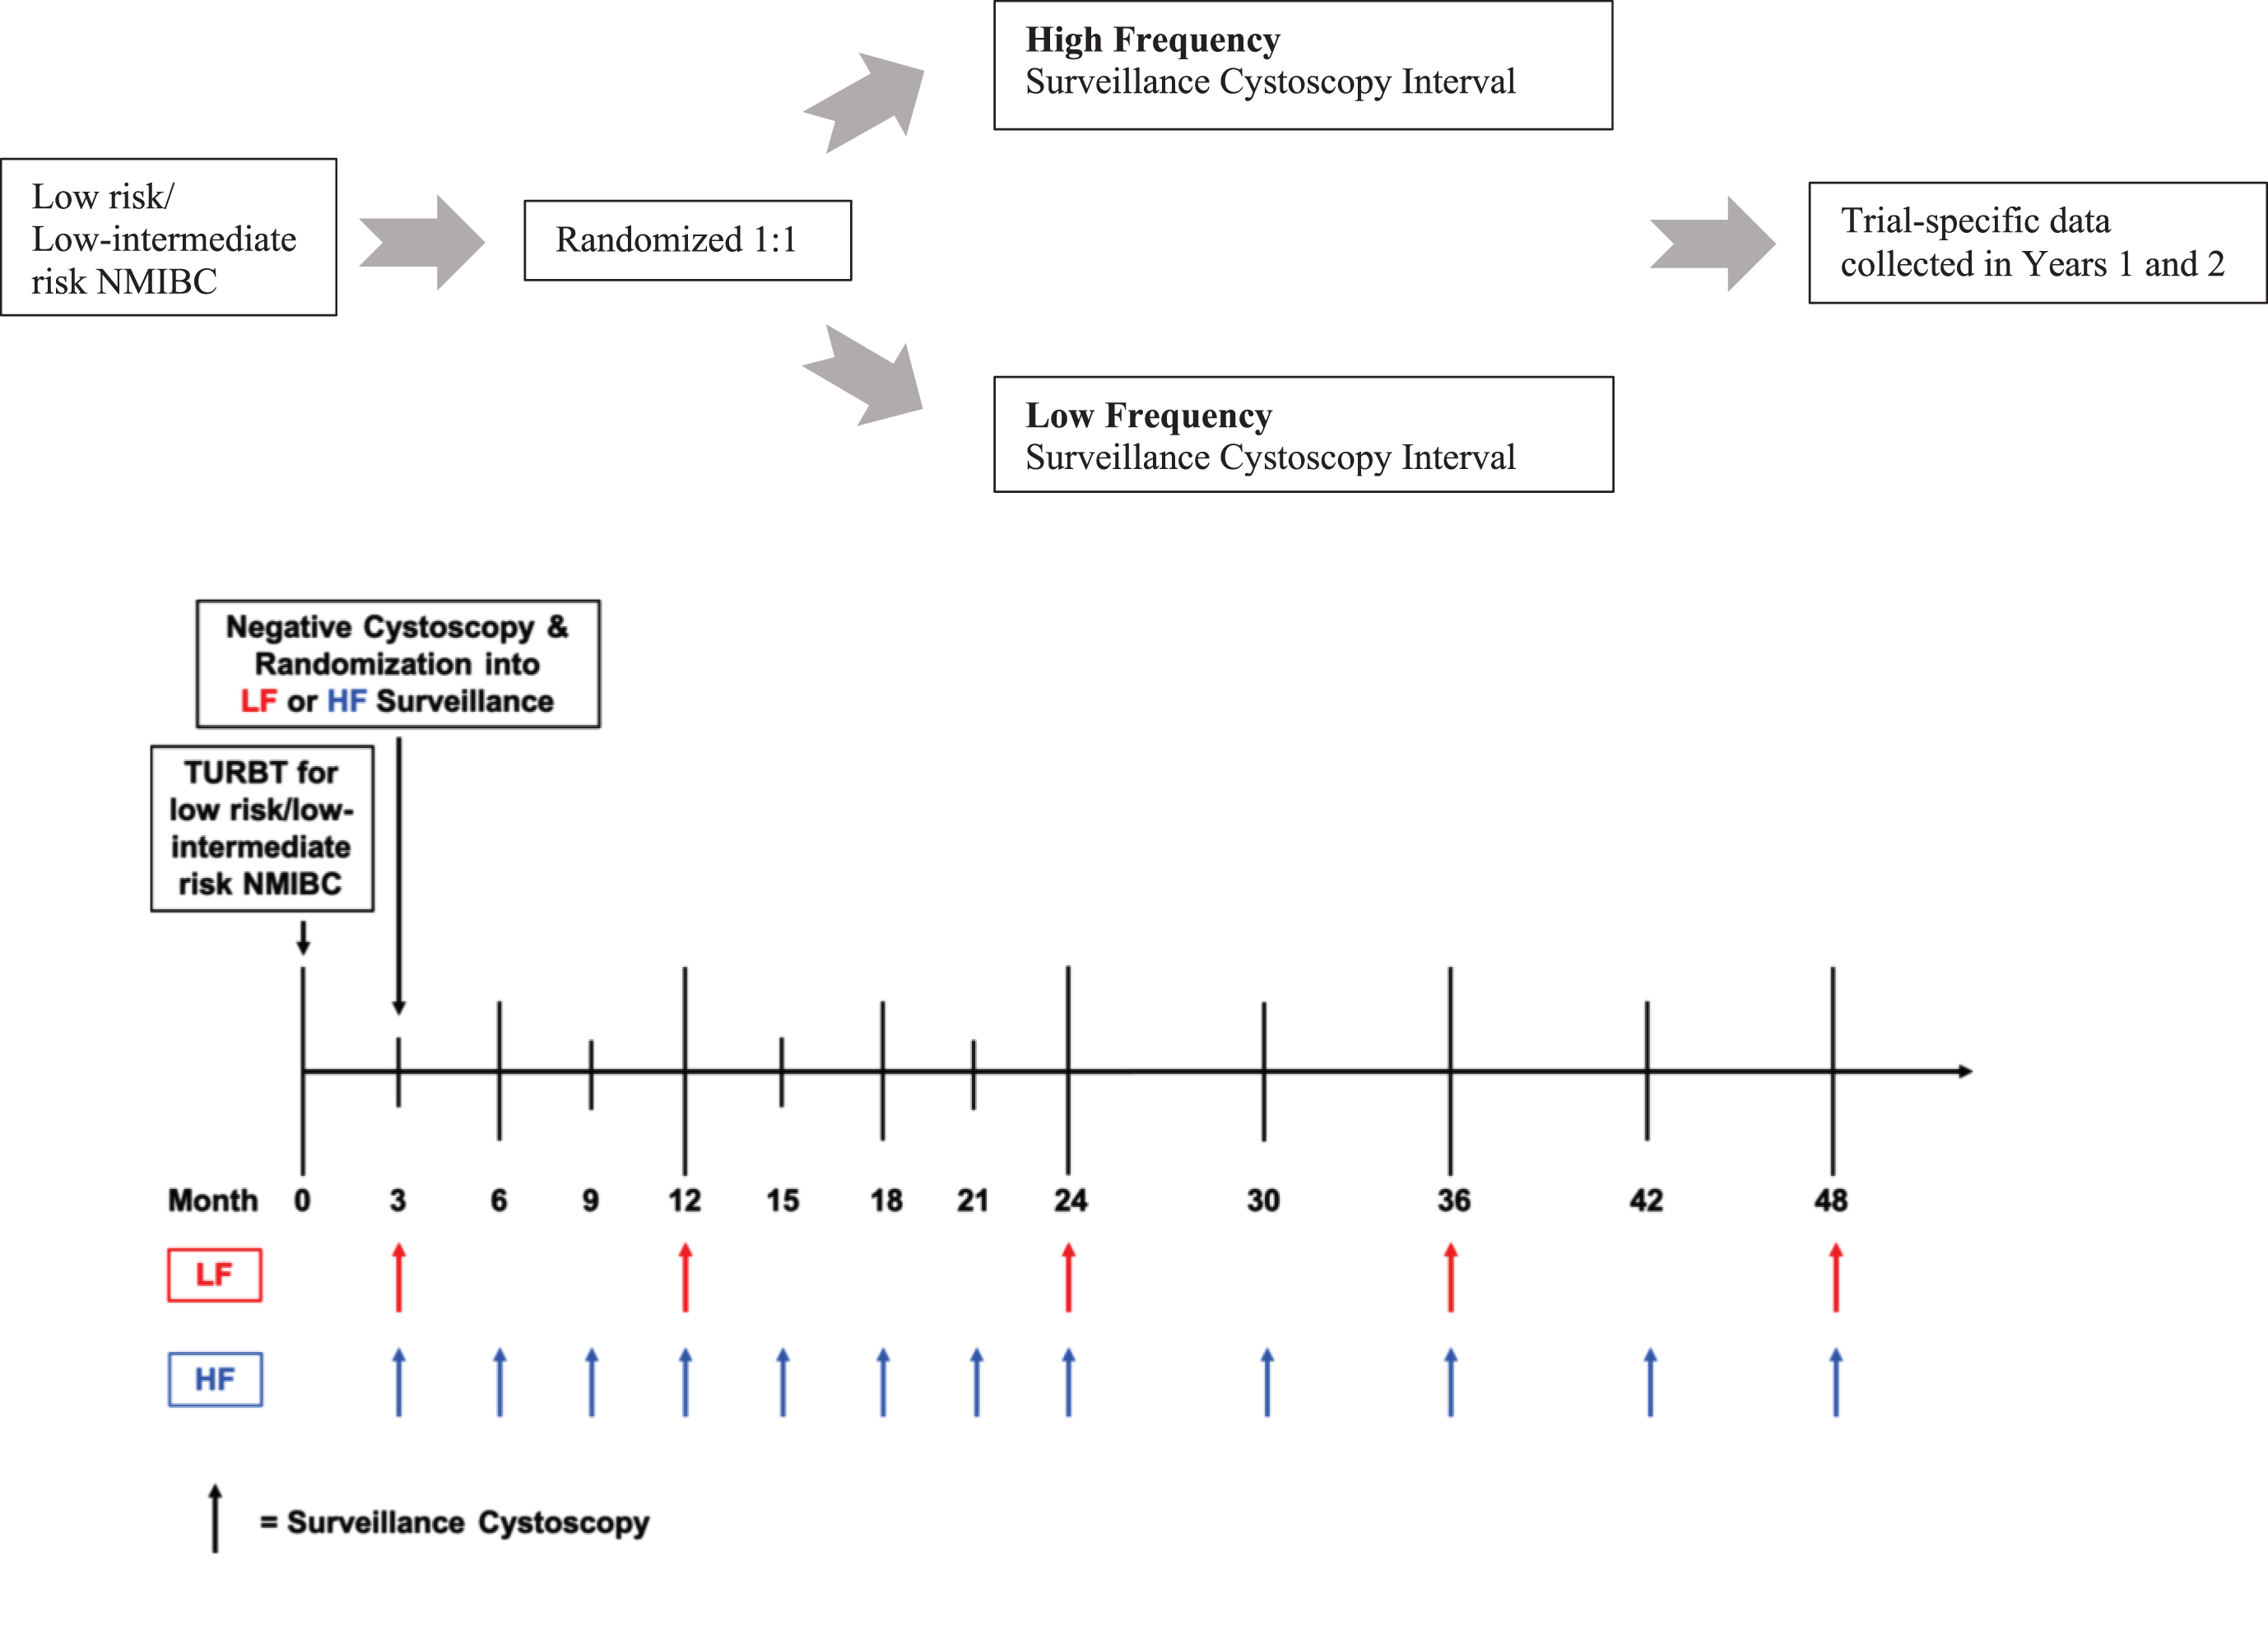 Trial schema and timeline of surveillance cystoscopies across low and high frequency surveillance groups.